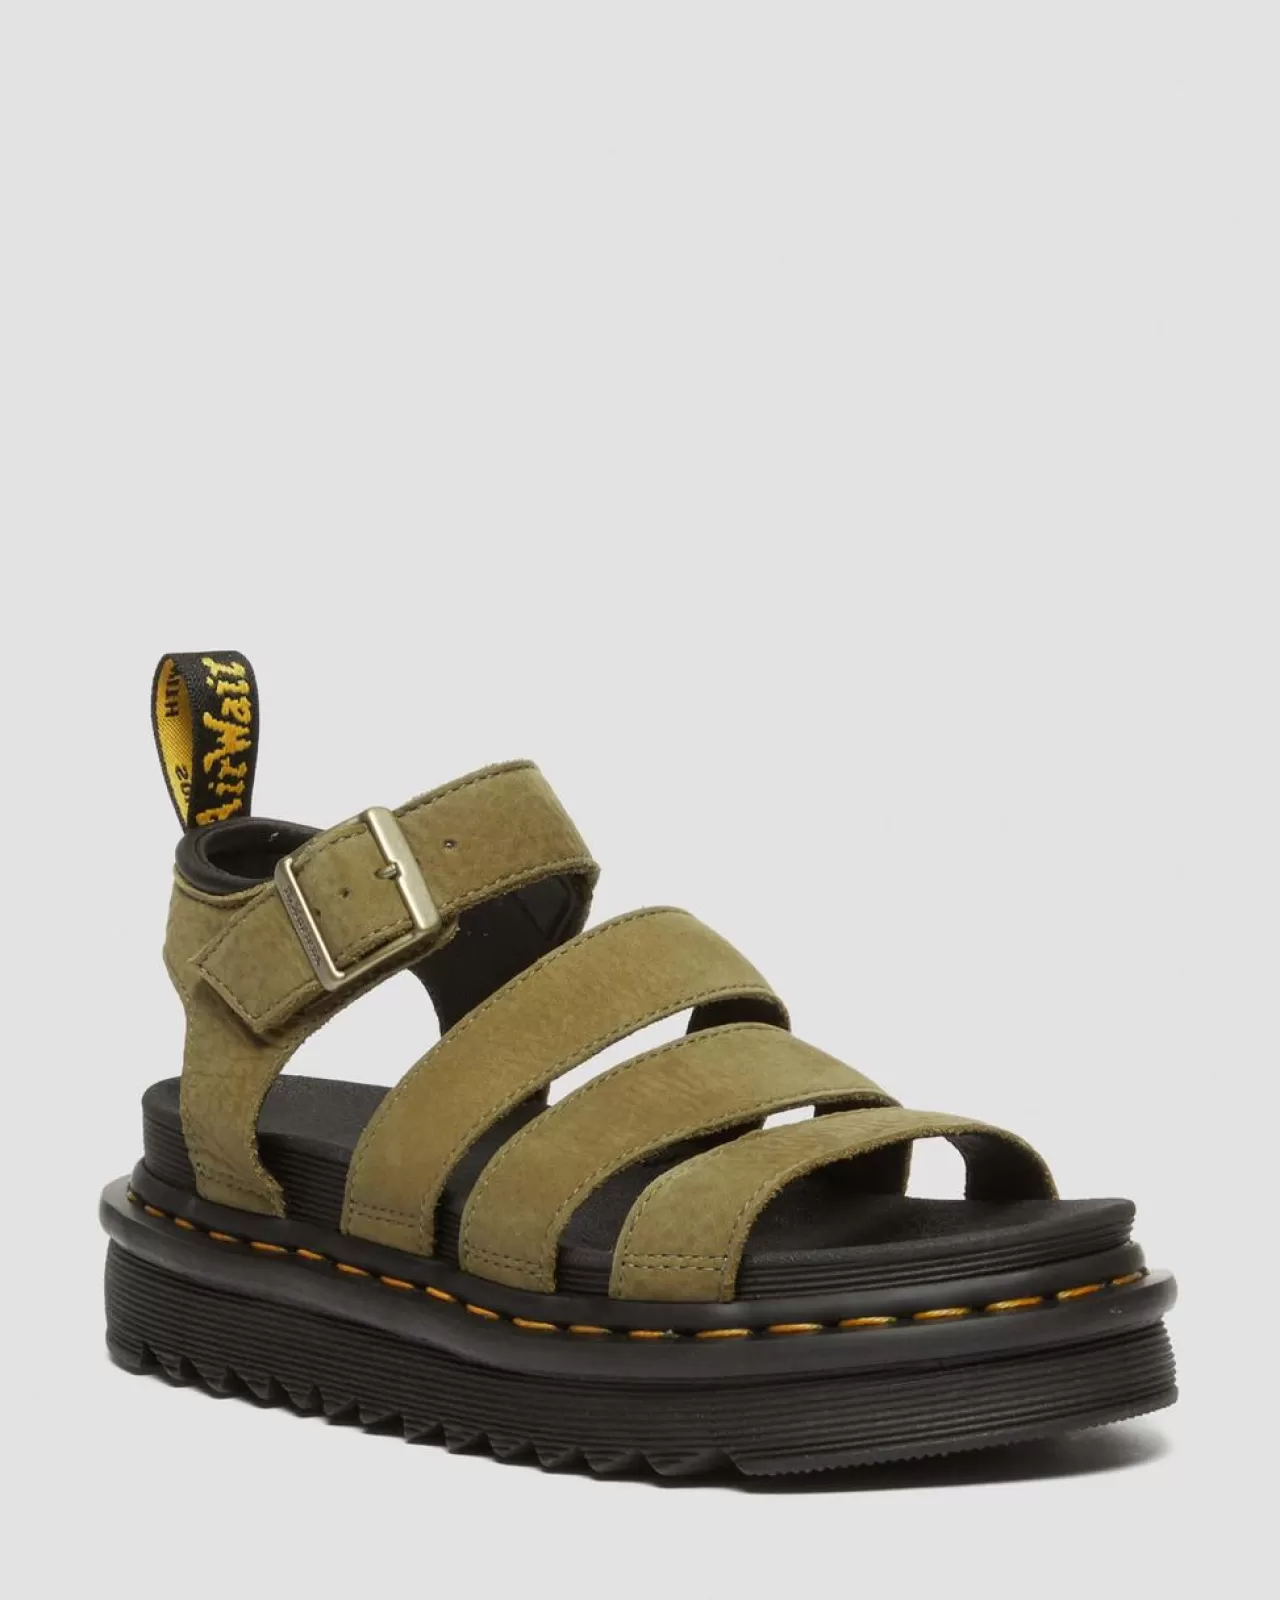 Strap Sandals | Sandals^Dr. Martens Blaire Tumbled Nubuck Leather Sandals Muted Olive — Tumbled Nubuck